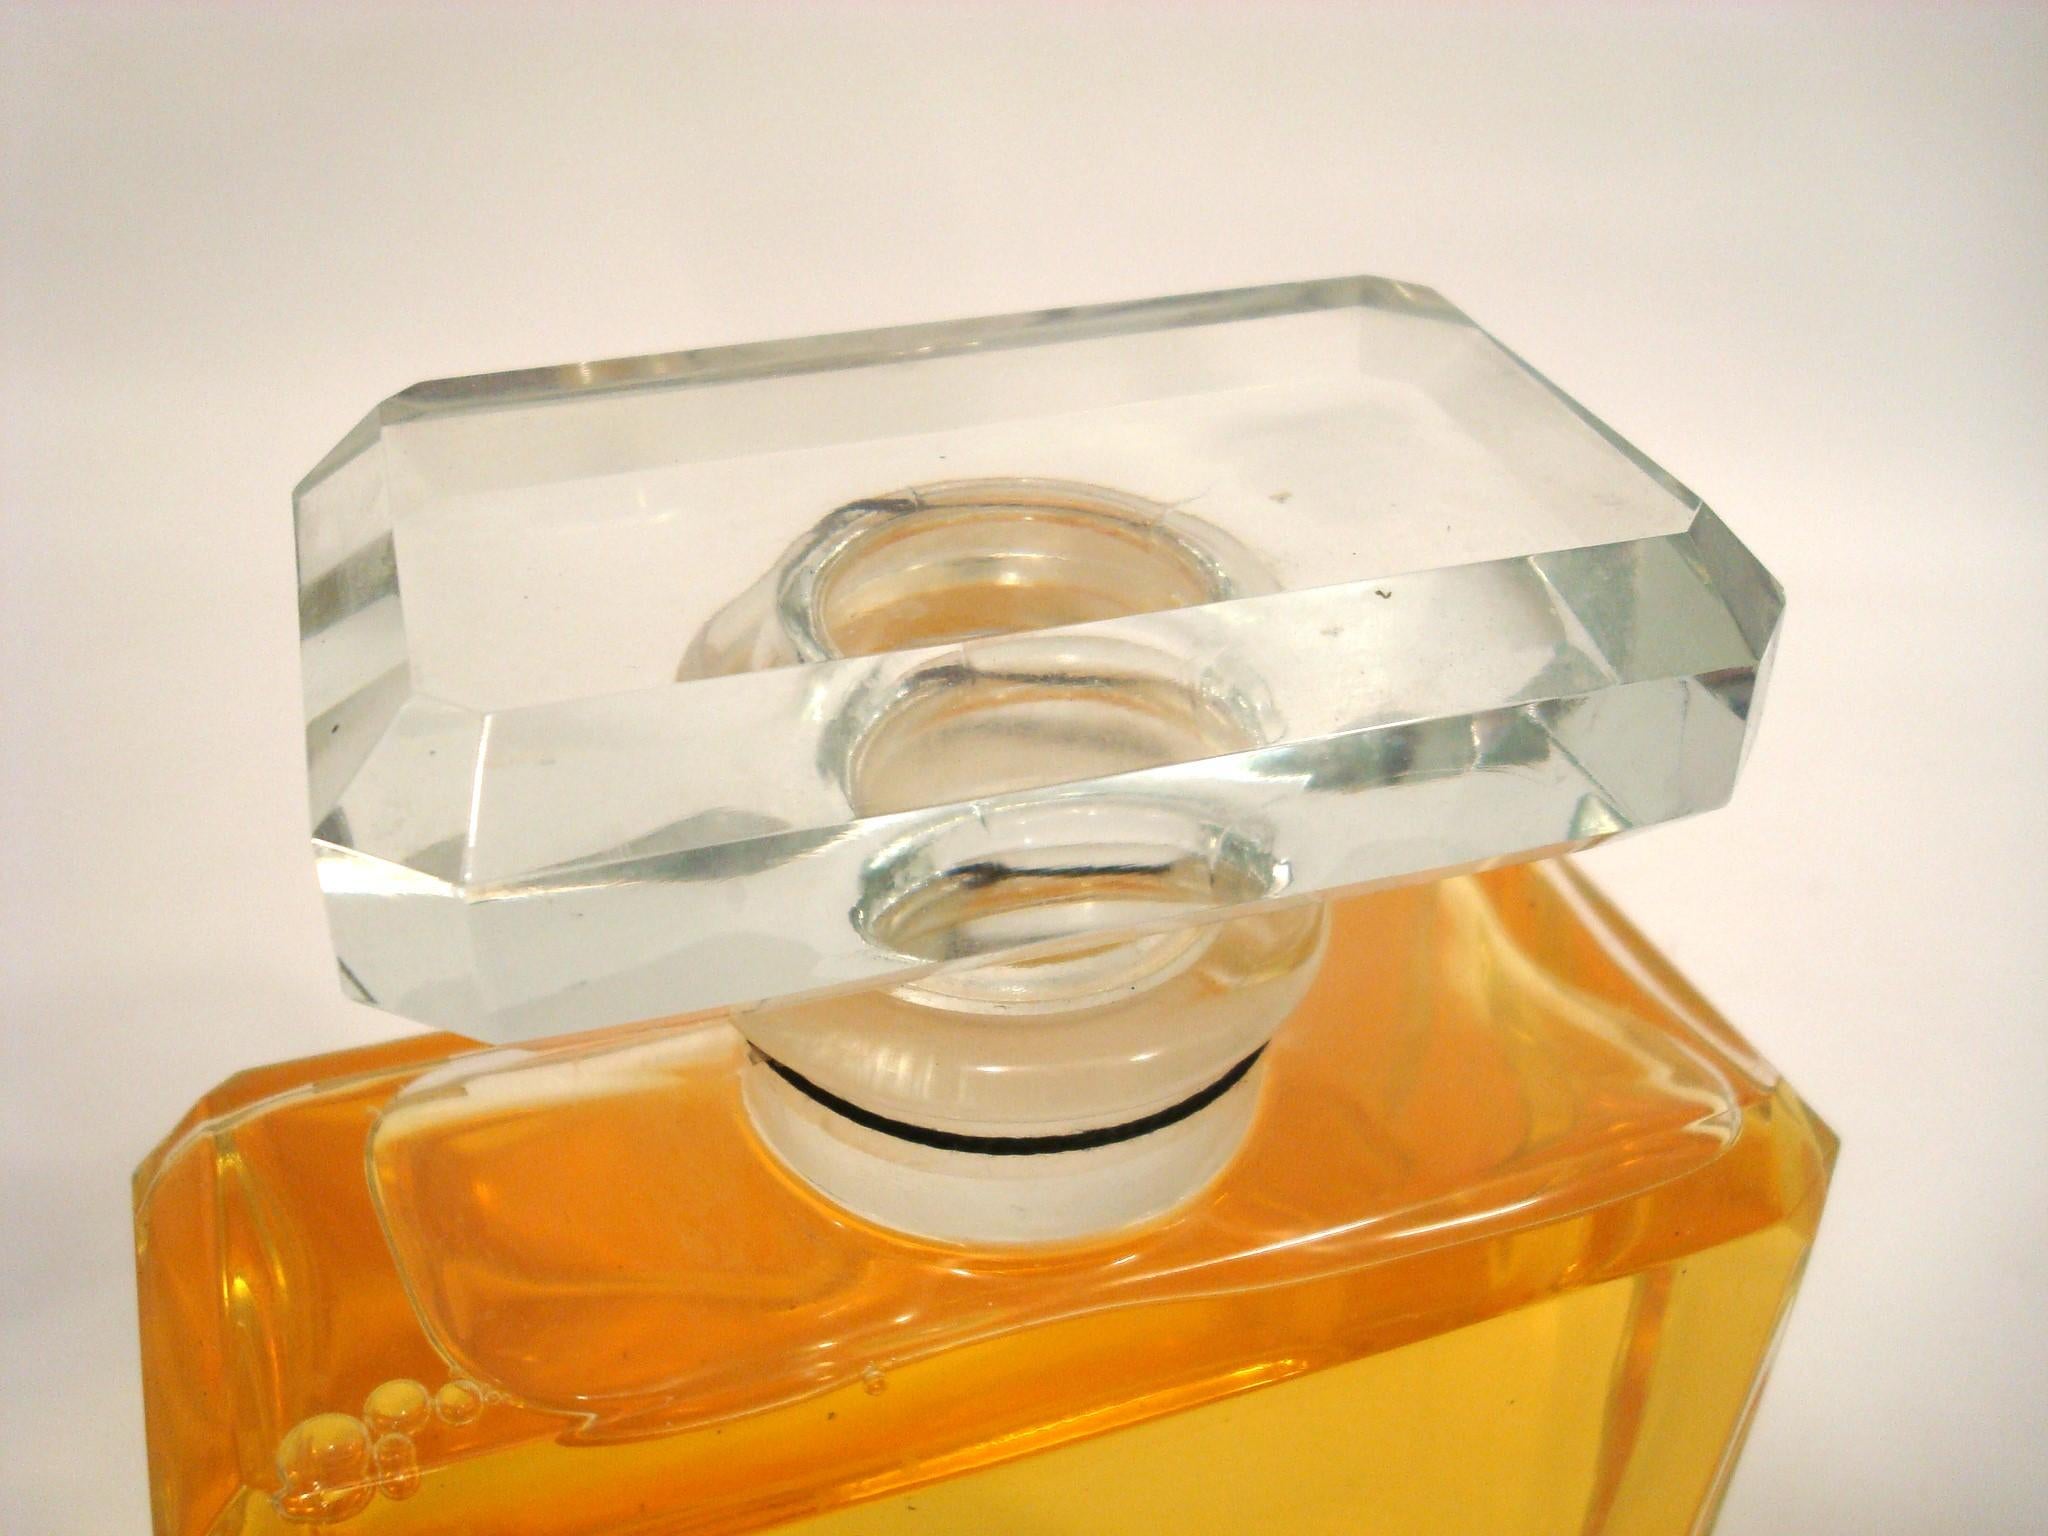 Chanel N5 Huge Store Display Perfume Bottle Advertising, France, 20th Century For Sale 2